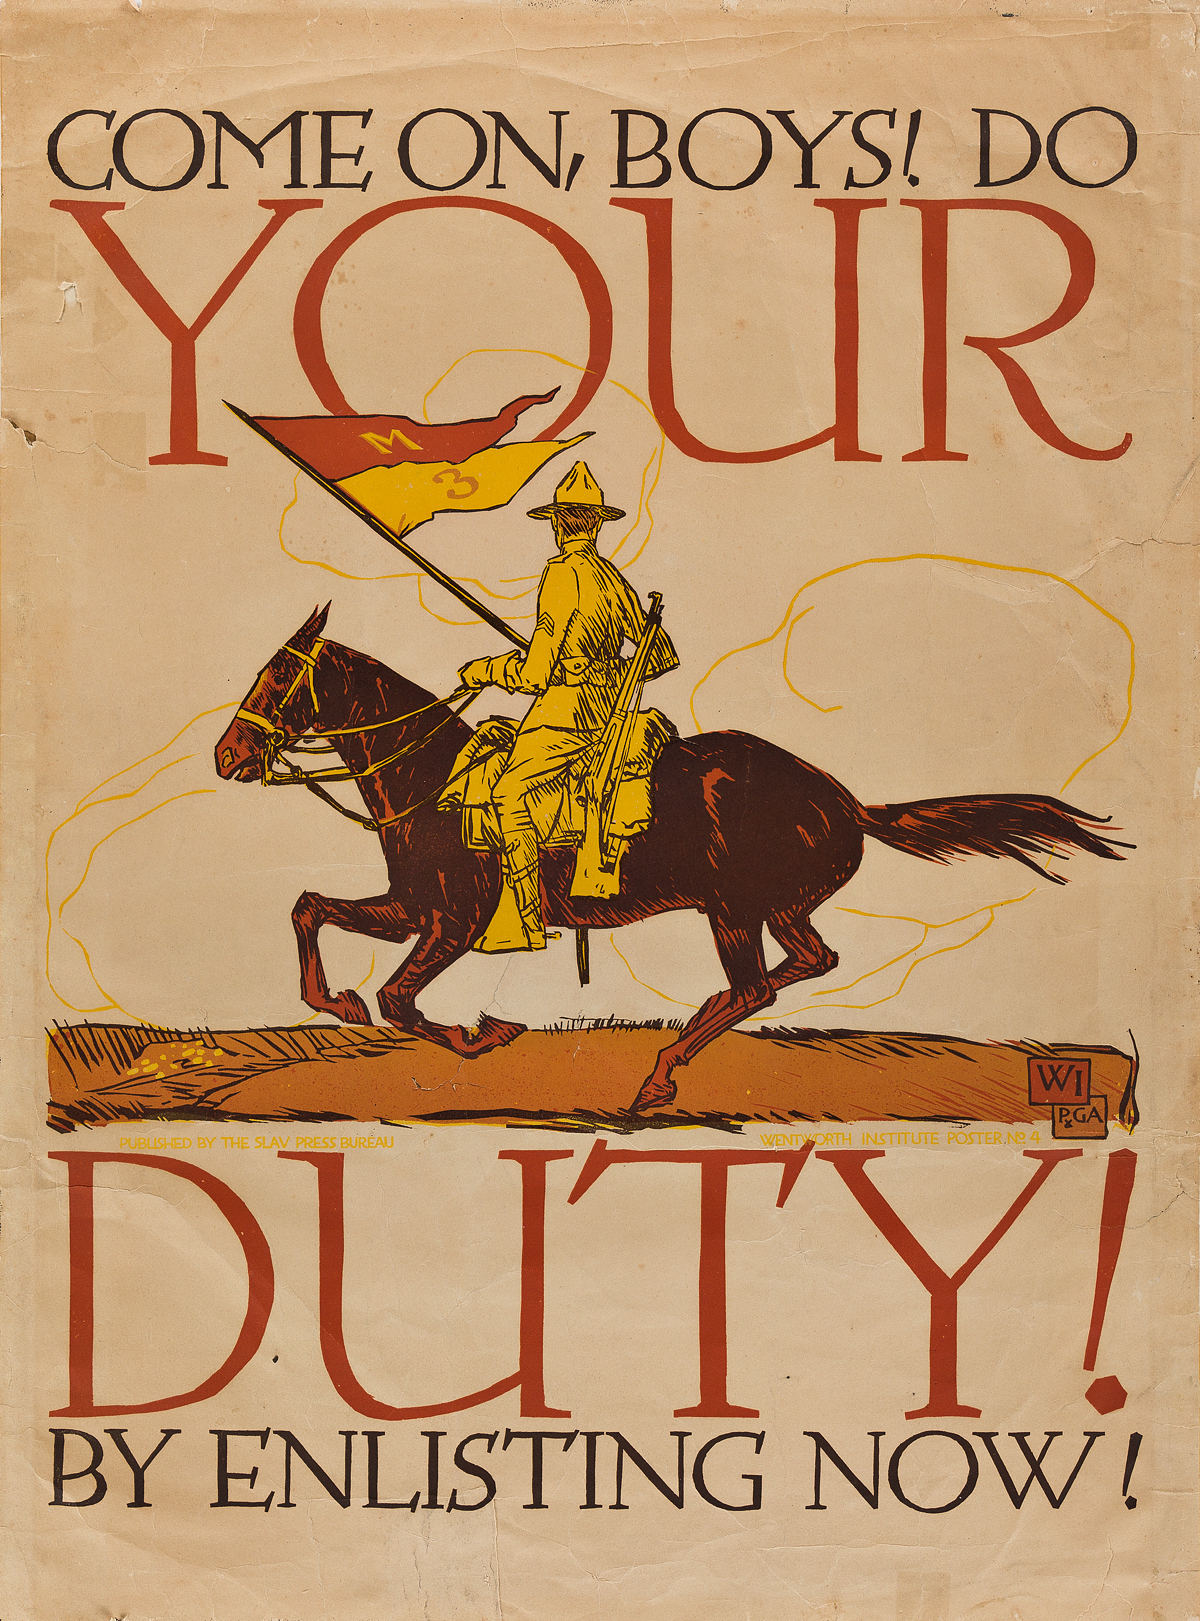 VOJTECH PREISSIG (1873-1944). COME ON, BOYS! DO YOUR DUTY! BY ENLISTING NOW! 1917. 30x22 inches, 78x57 cm. Wentworth Institute, Boston.